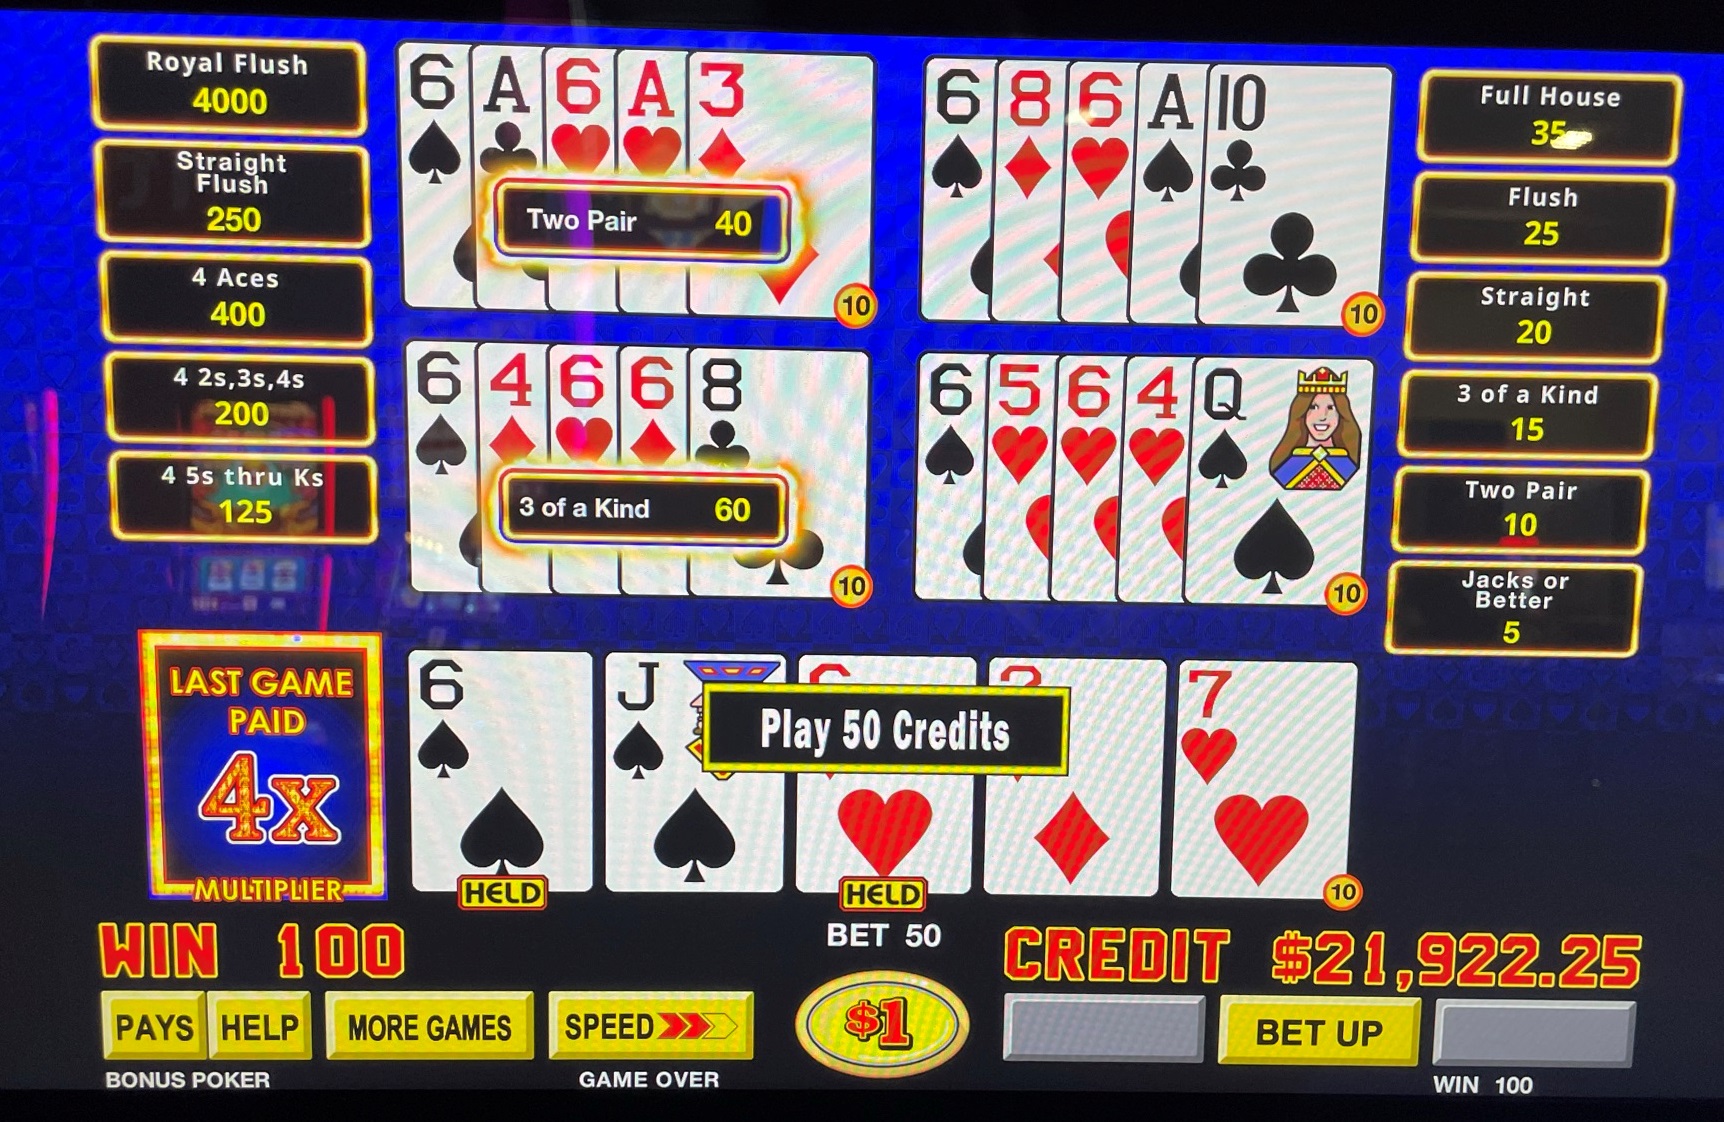 What's the role of luck in Video Poker?